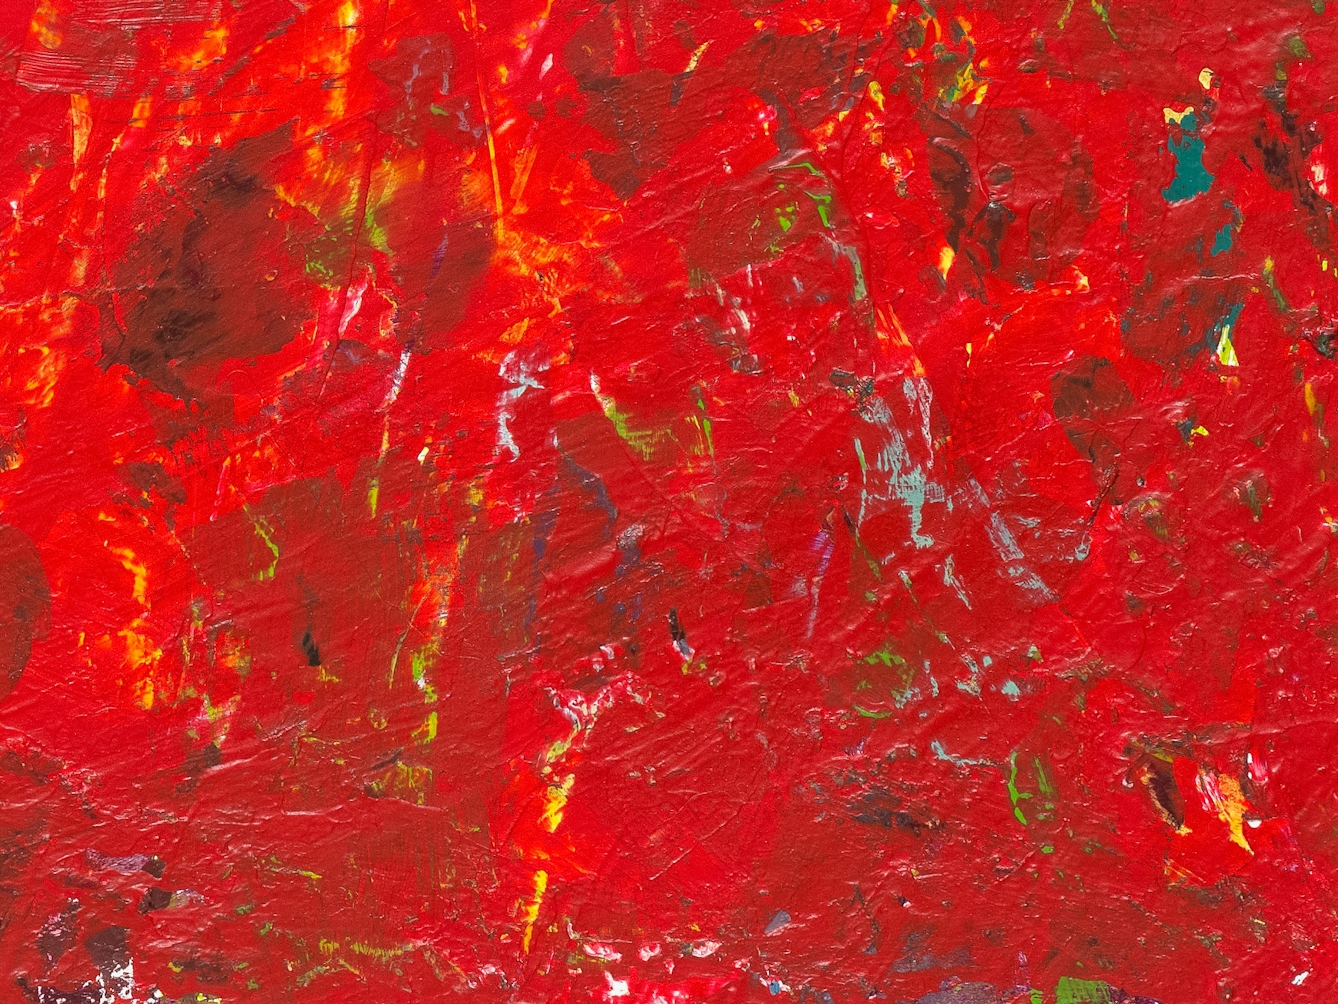 Photograph of close-up detail of a larger abstract expressionist painting  utilising acrylic paint on a rectangular canvas in landscape orientation, titled 'Boundaries'. The artwork explores themes of setting clear boundaries, giving consideration to our privacy, and potential oversharing.

A vast majority of the canvas surface contains harmonious marks and gestures of earthy tones - including yellow, green, teal, burgundy, brown, orange and white. It's akin to a dense, blooming meadow of various plants and flowers. To the right-side, an overlapping band of red sweeps across the focal layer and creates a very distinct barrier and contrast, in both colour and textural quality.